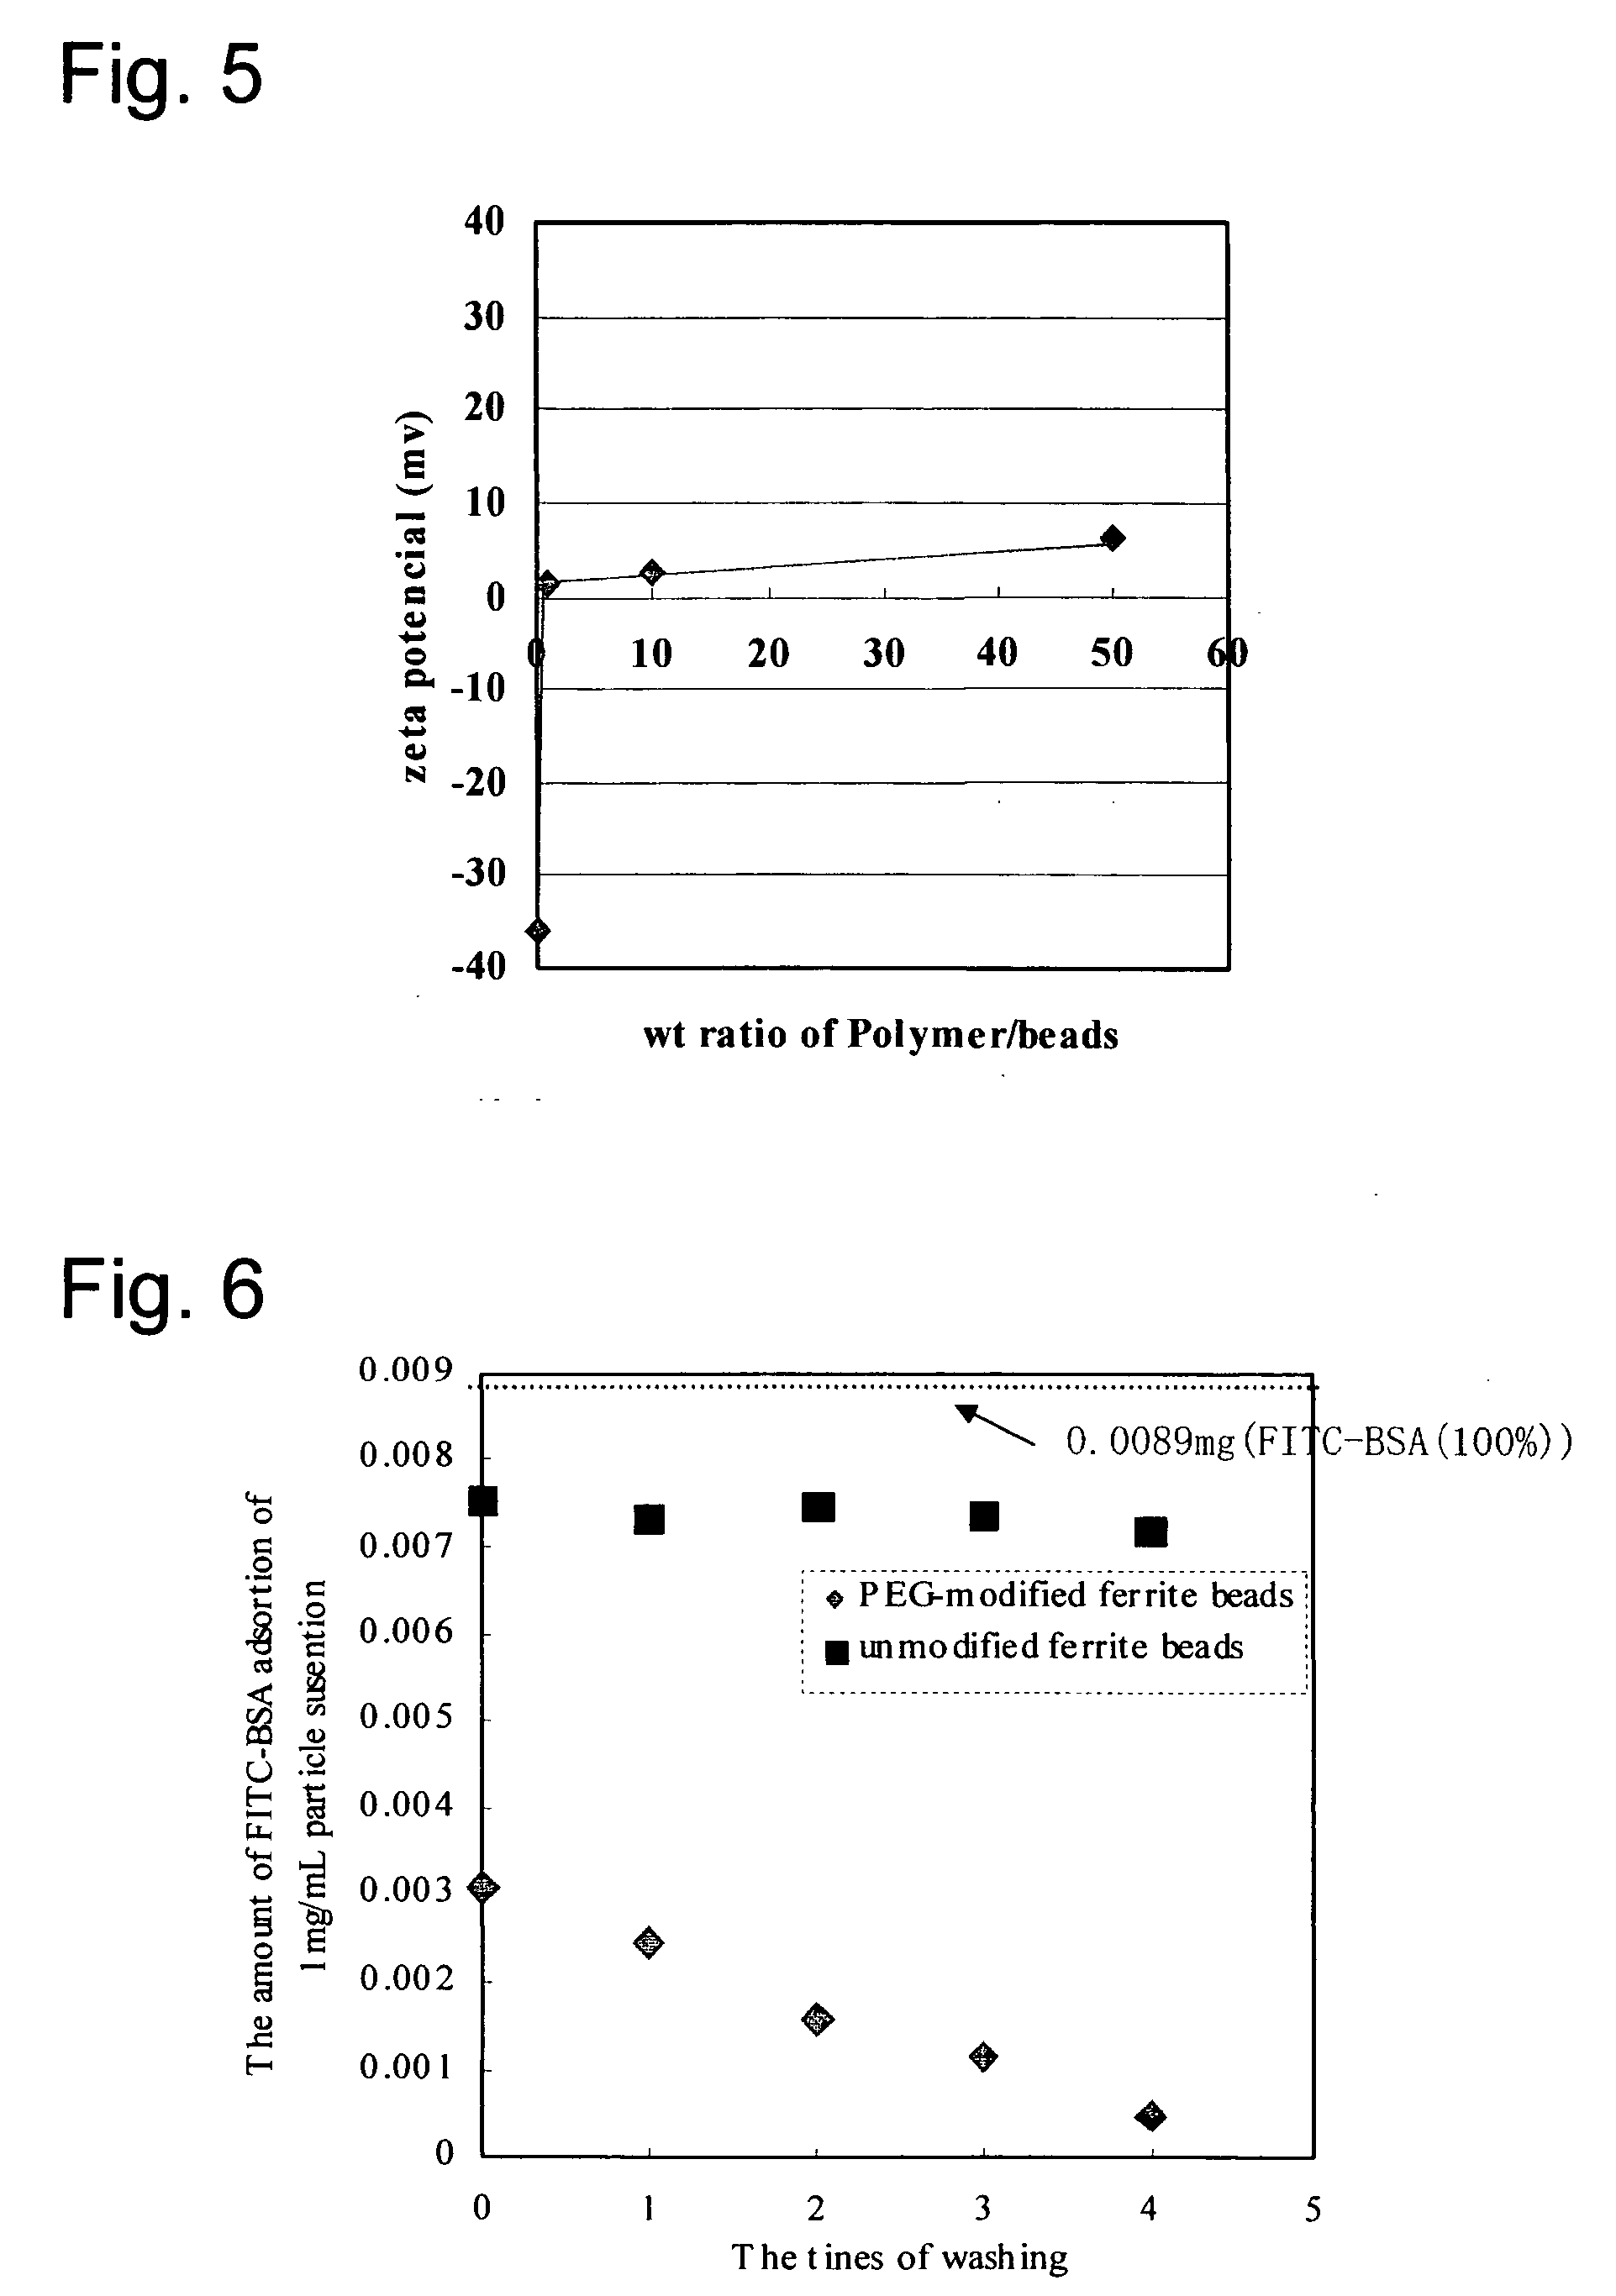 Surface of base material being inhibited in non-specific adsorption